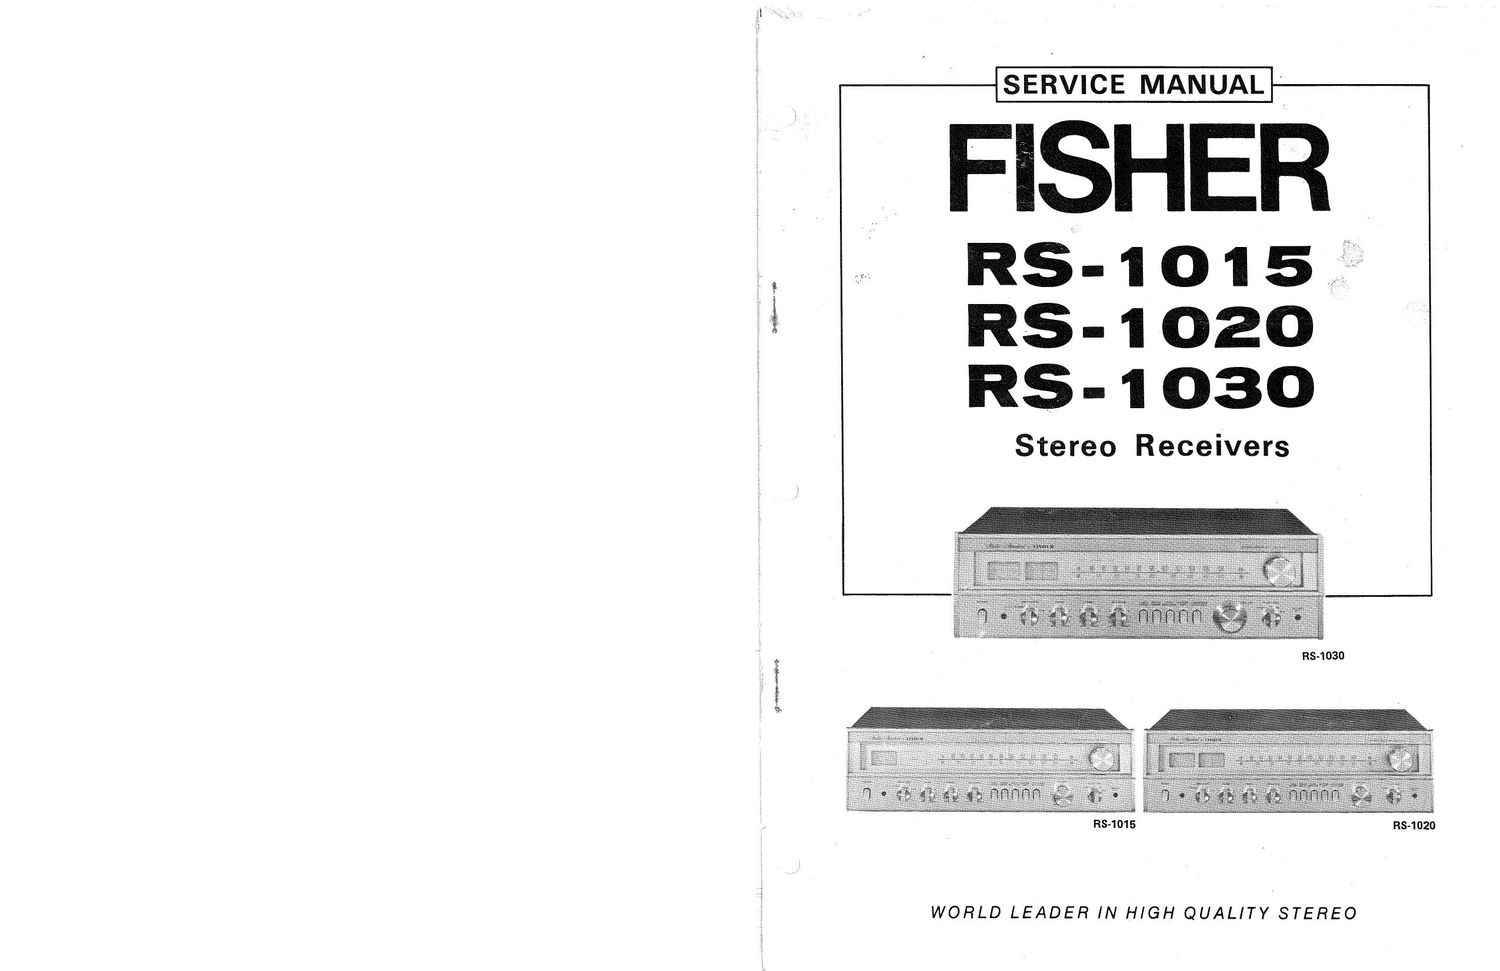 Fisher RS 1030 Service Manual